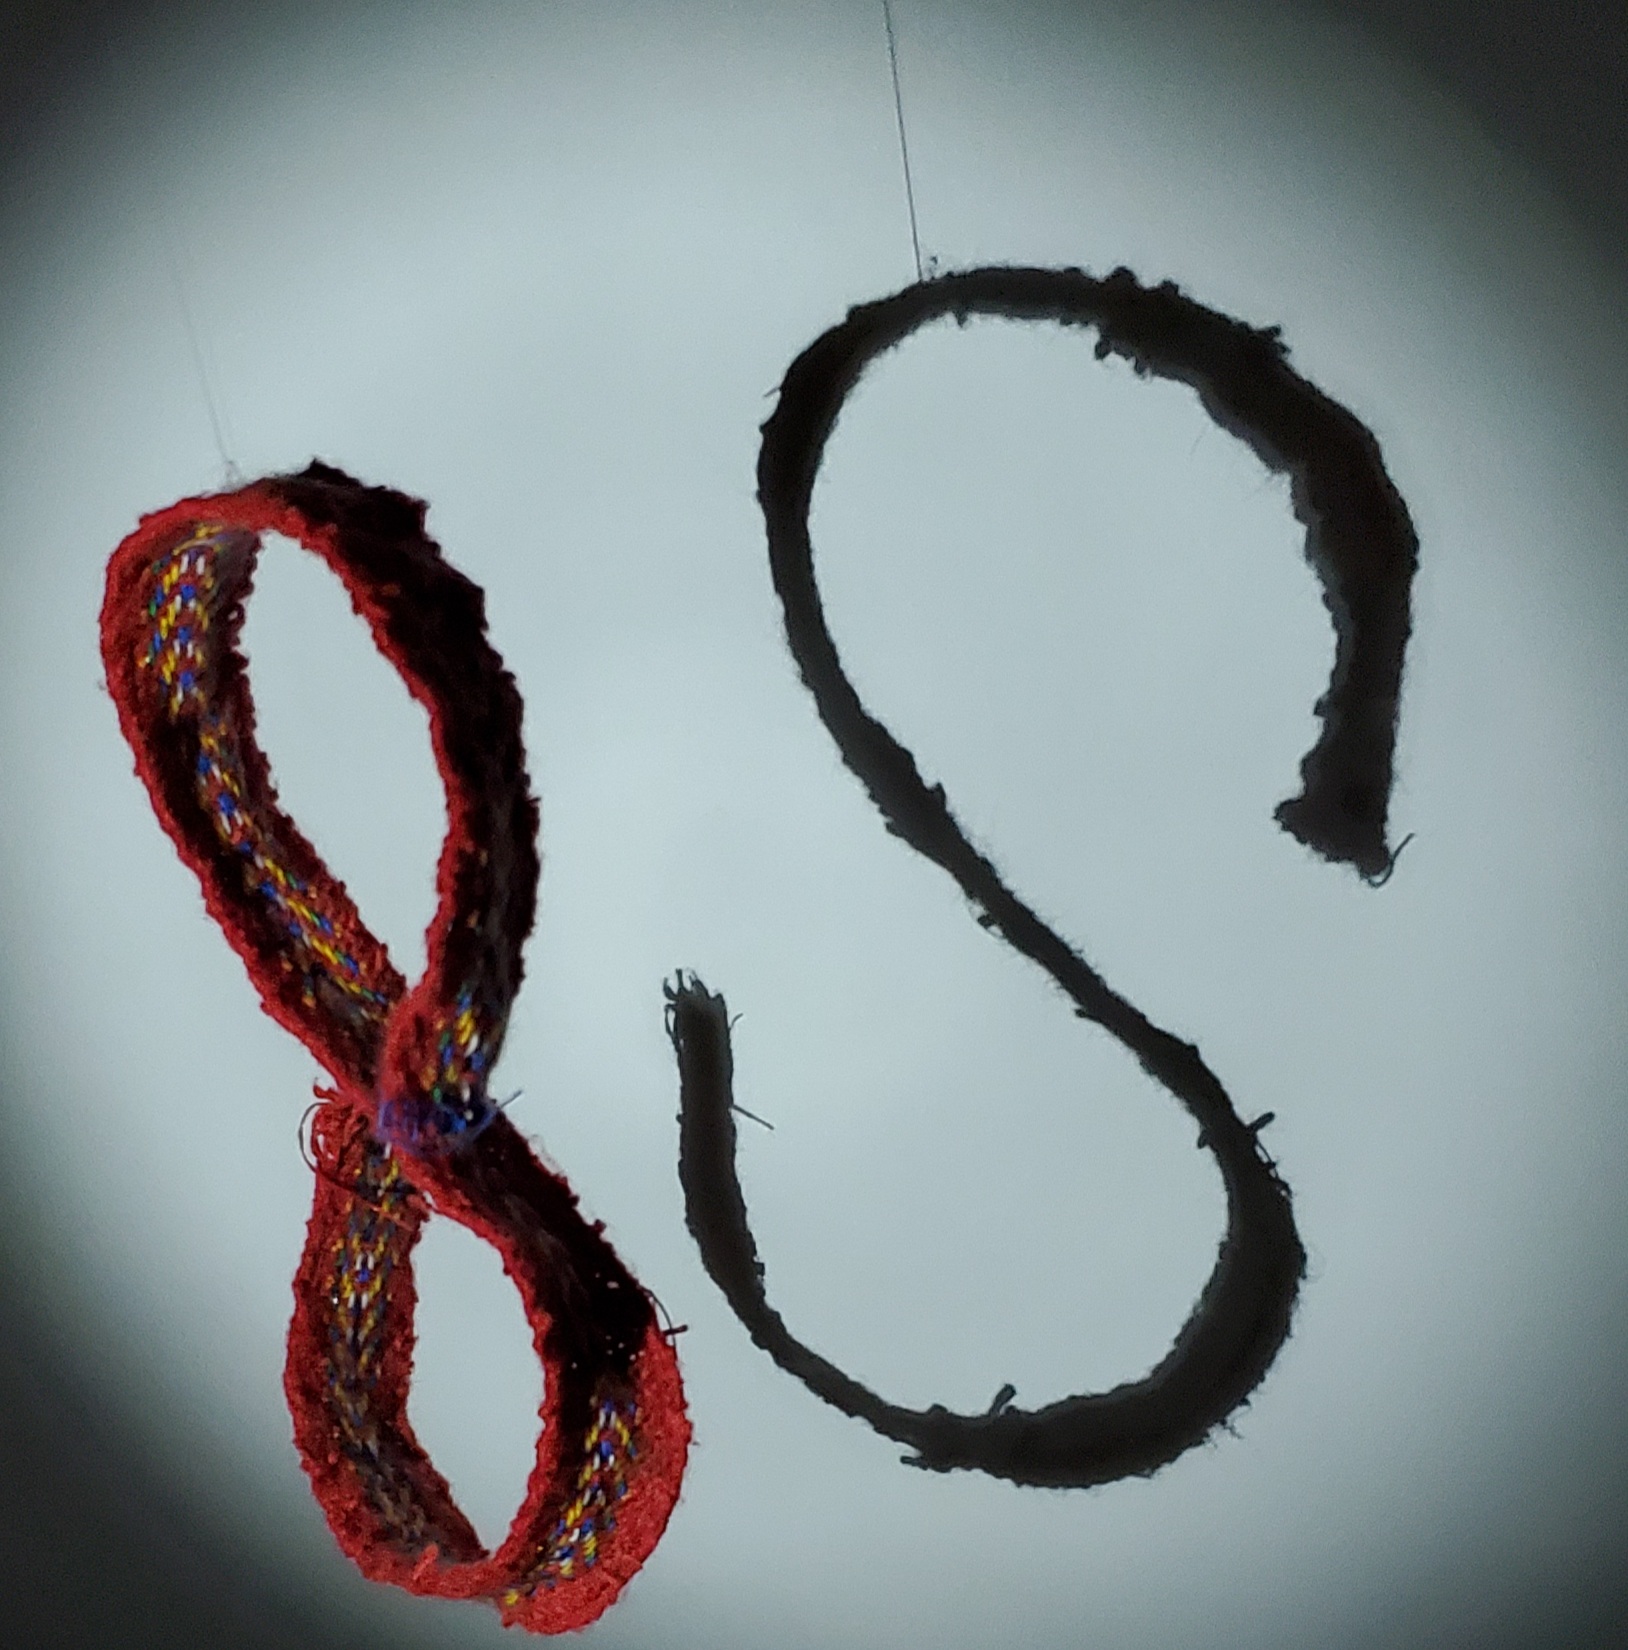 The letter 'S', made by a Métis sash